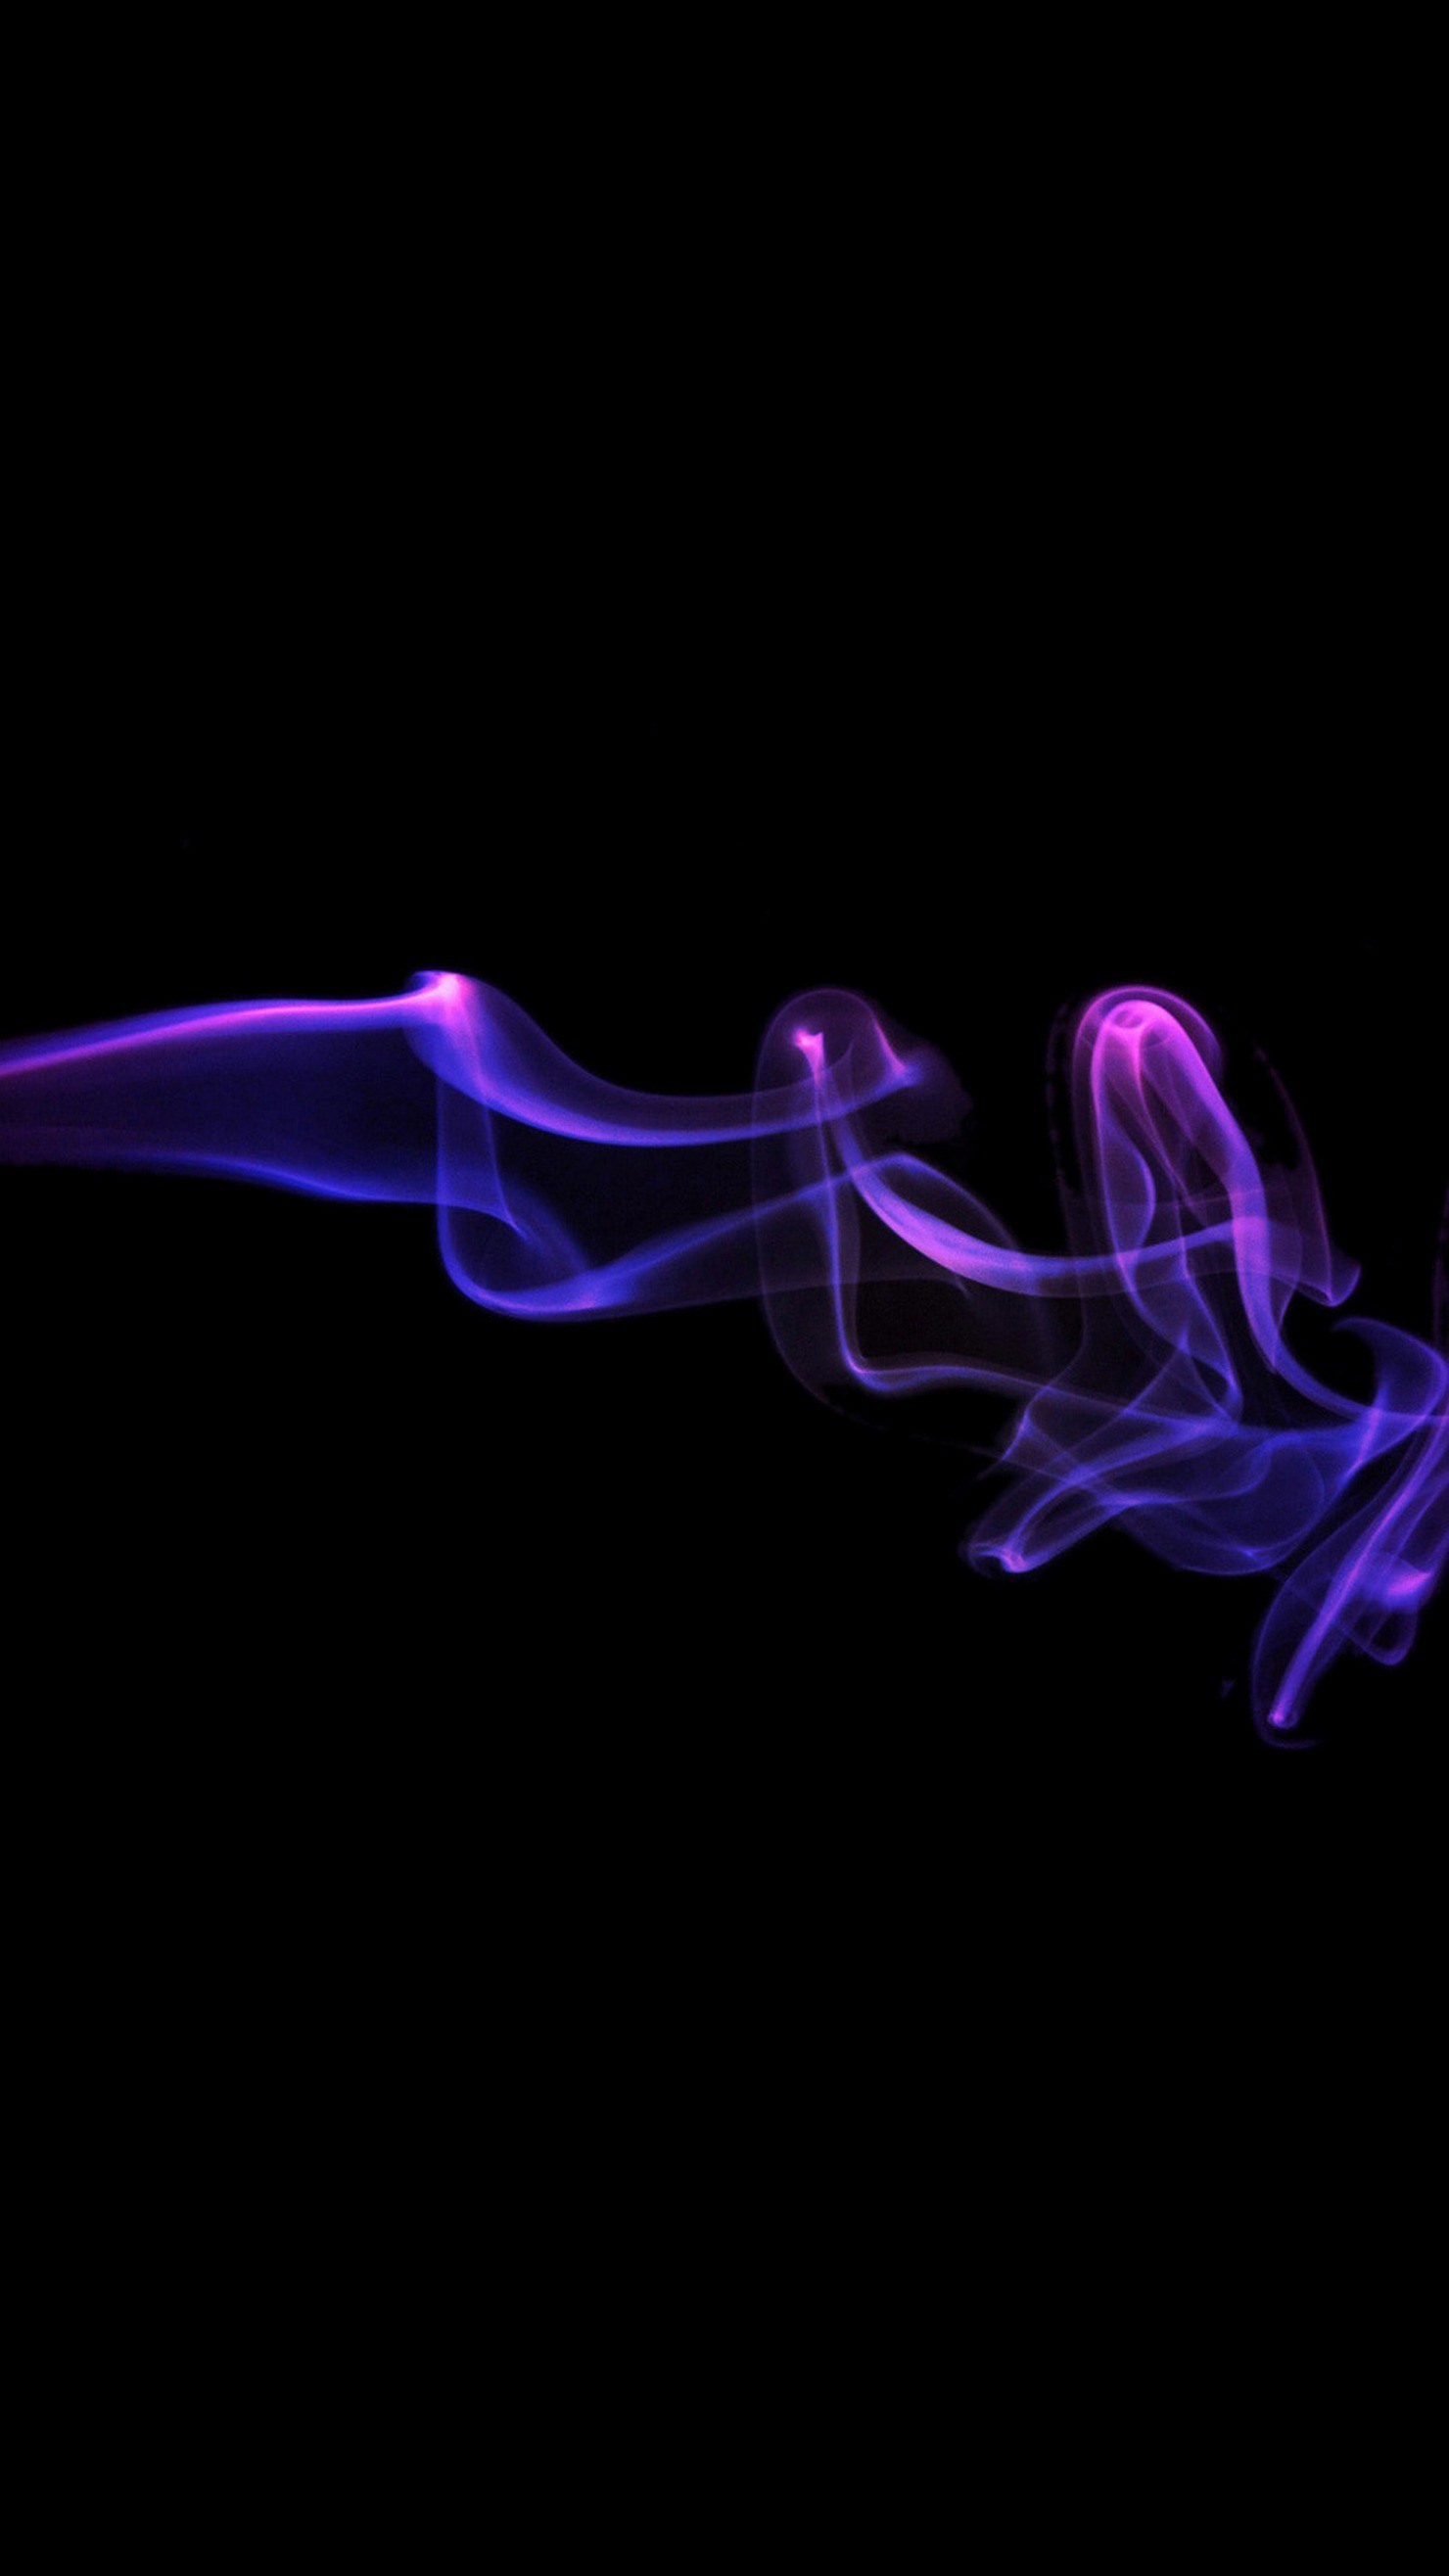 1480x2631 ... Mobile HD Wallpapers ABSTRACT SMOKE BACKGROUND VIOLET BLACK .